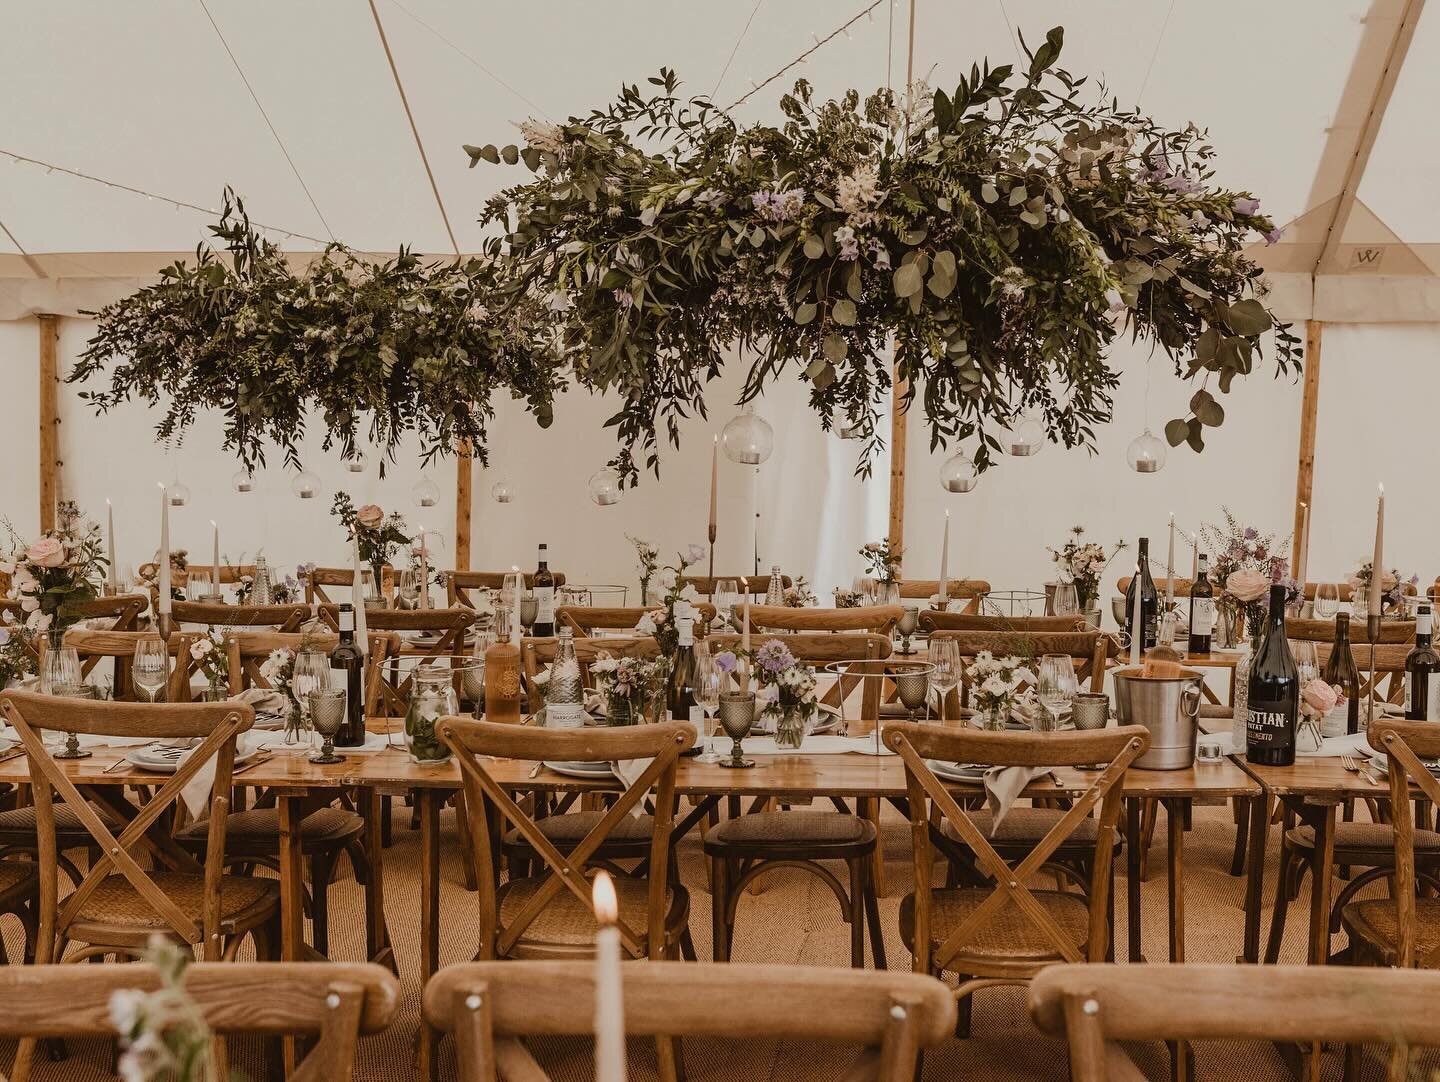 Floating flowers 🫶🏻

From floral halos to flower clouds to lush green garlands, pillars, archways and so much more - make the most of a spacious interior, an elevated canopy and our skilled, experienced team to assist you and your florist in bringi